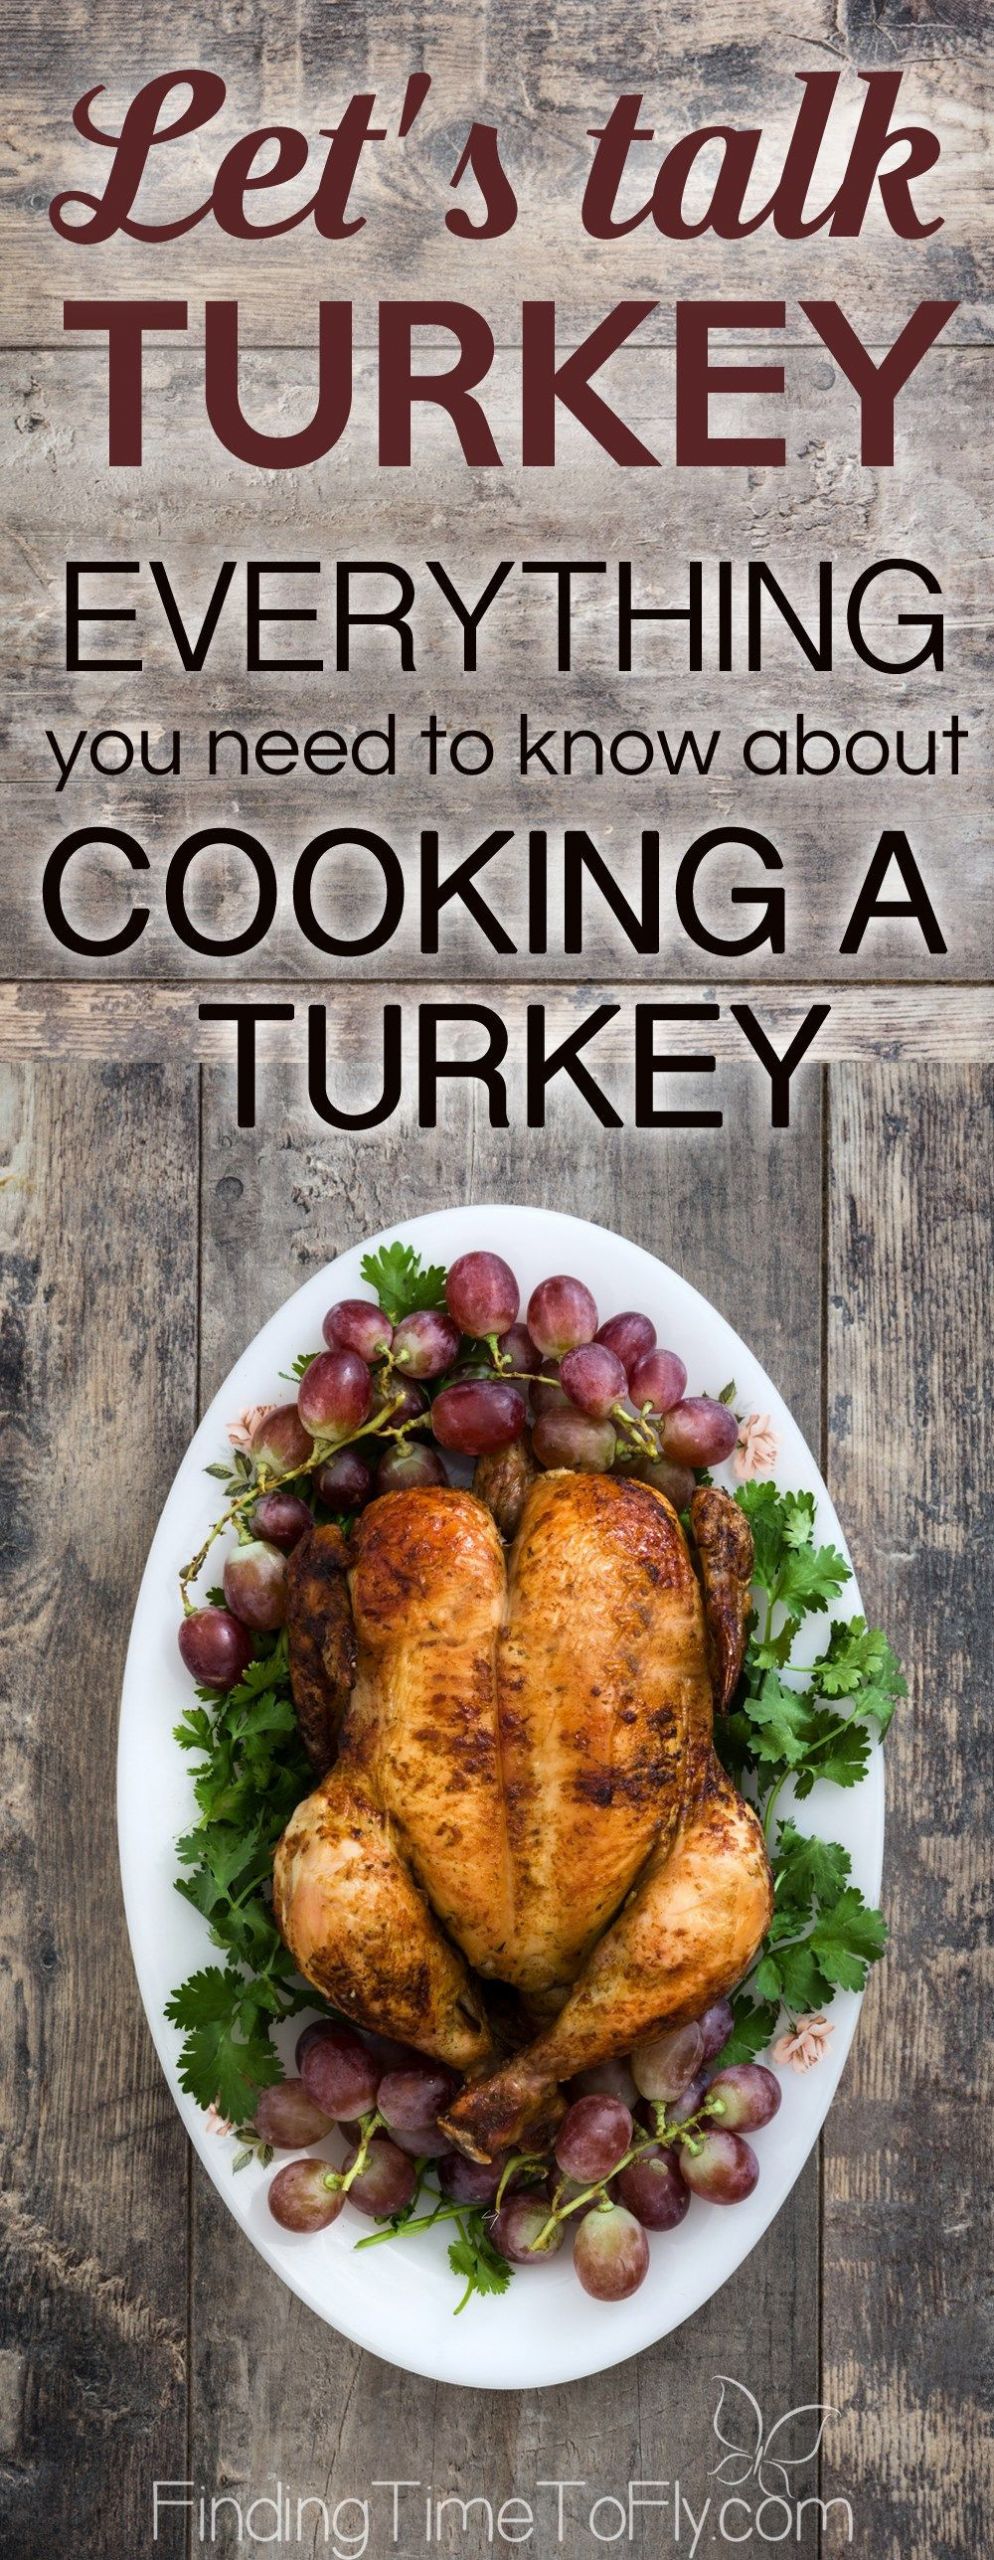 Buy A Cooked Turkey For Thanksgiving
 Everything You Need To Know About Cooking A Turkey